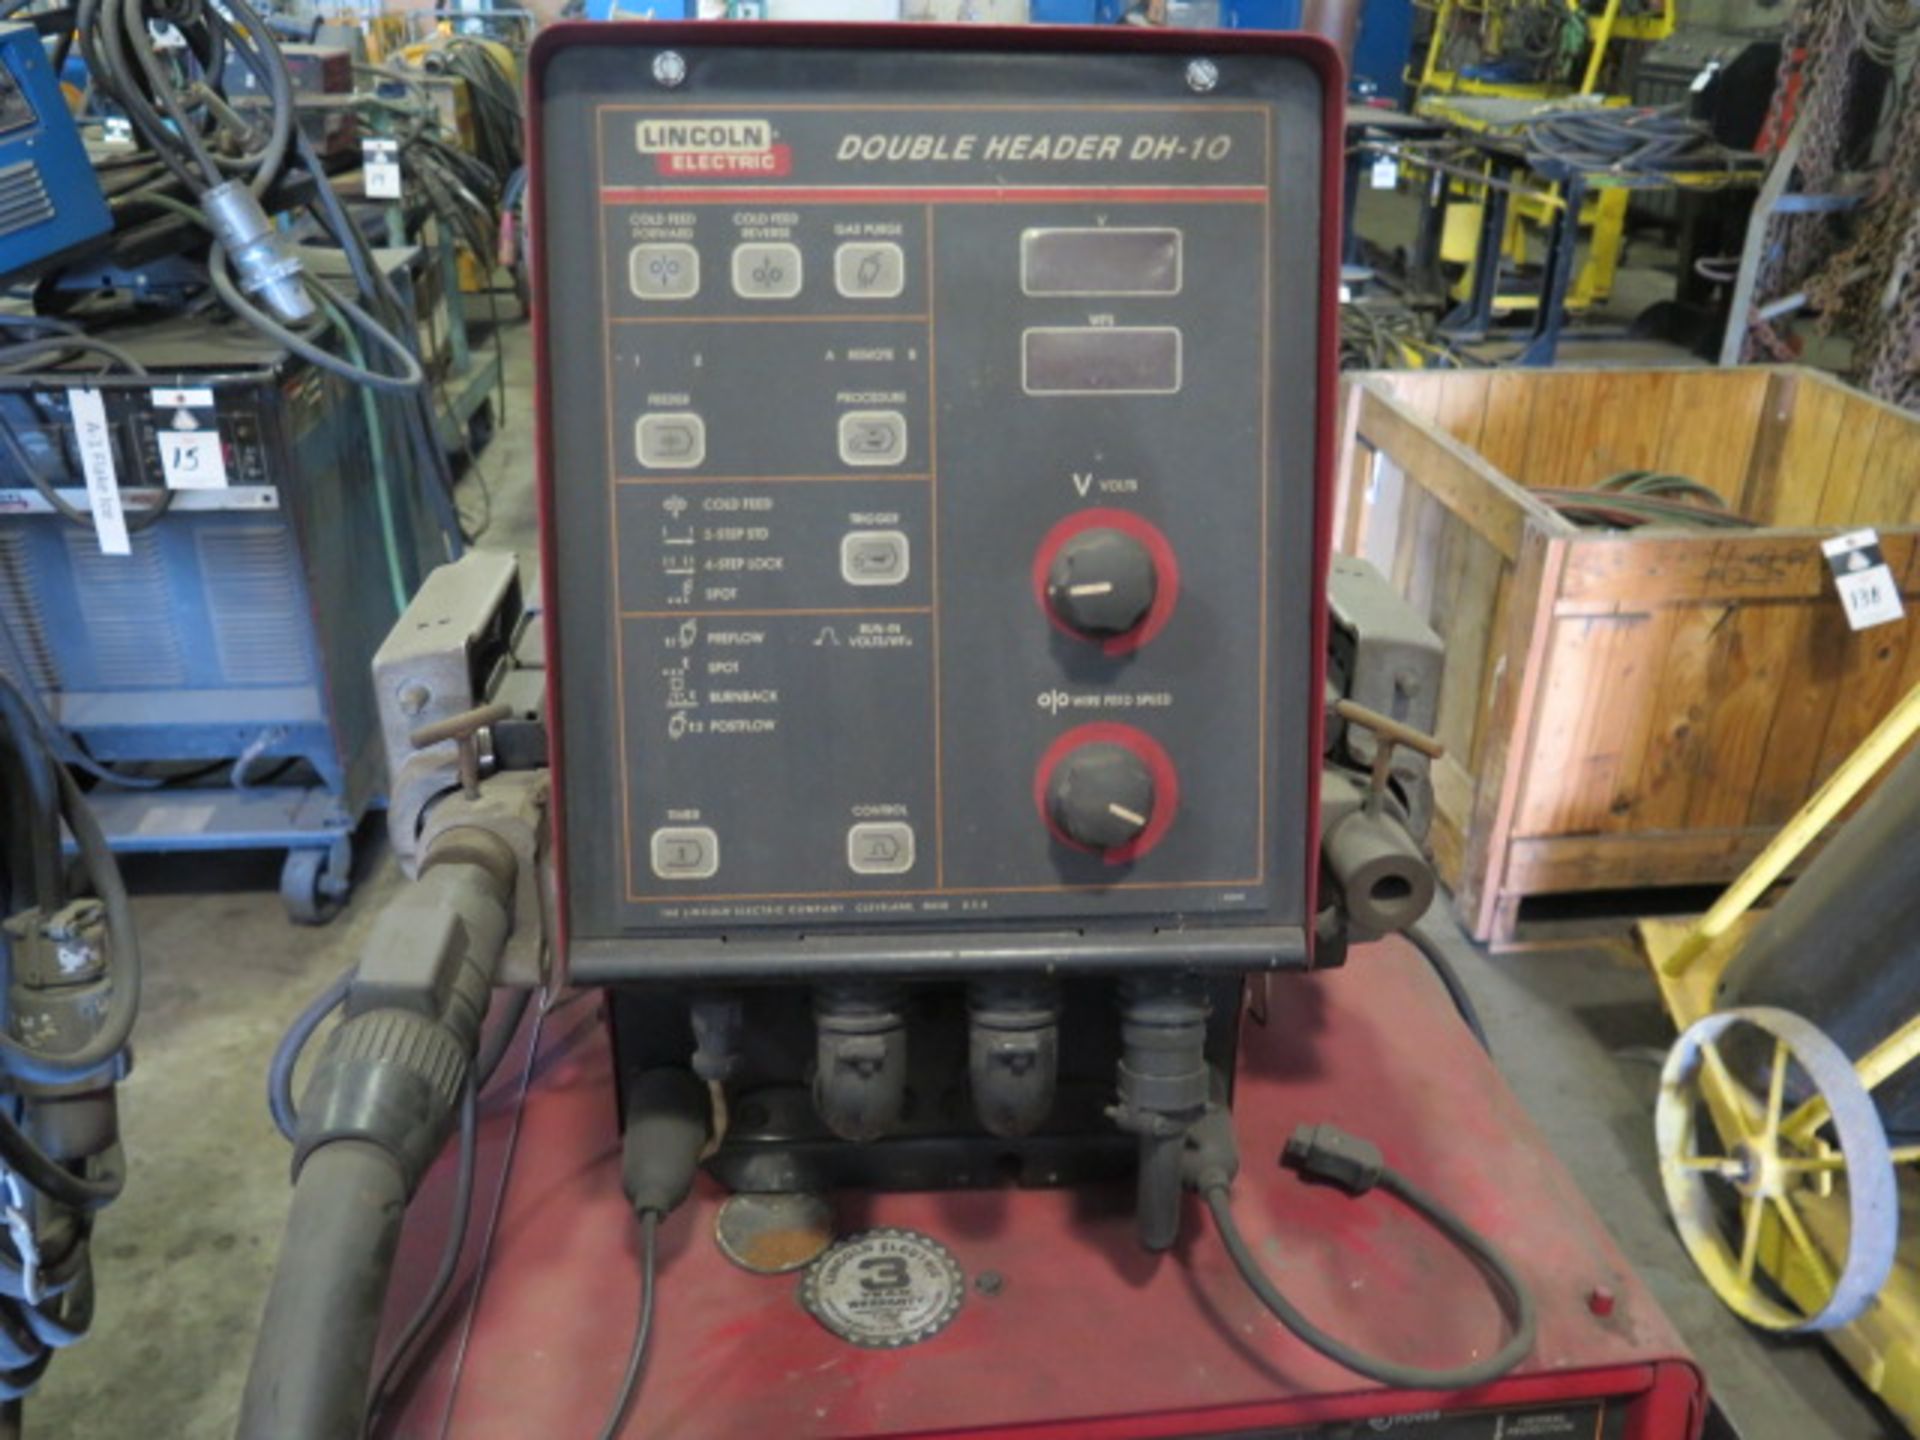 Lincoln CV-655 Arc Welding Power Source w/ Lincoln Double Header DH-10 Dual Wire Feed (SOLD AS- - Image 7 of 14